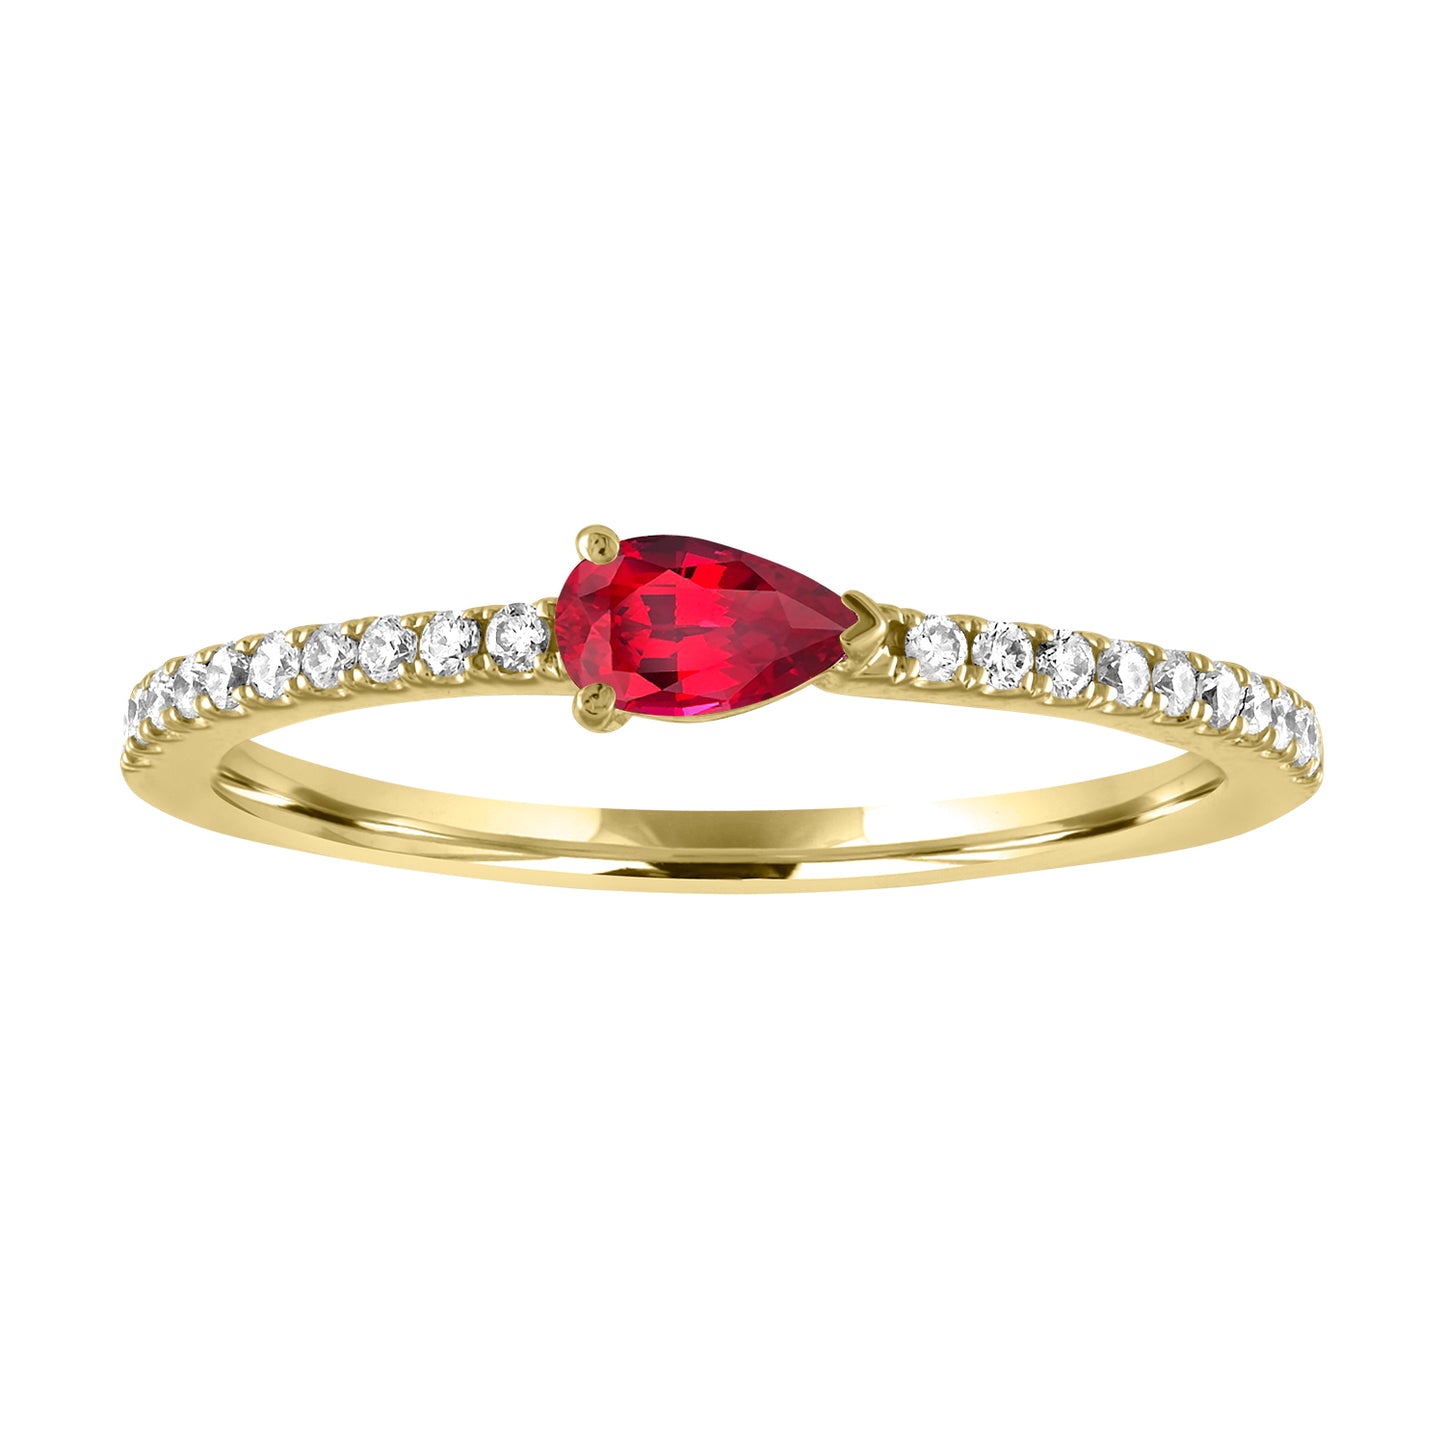 Yellow gold skinny band with pear shaped ruby in the center and round diamonds on the shank. 